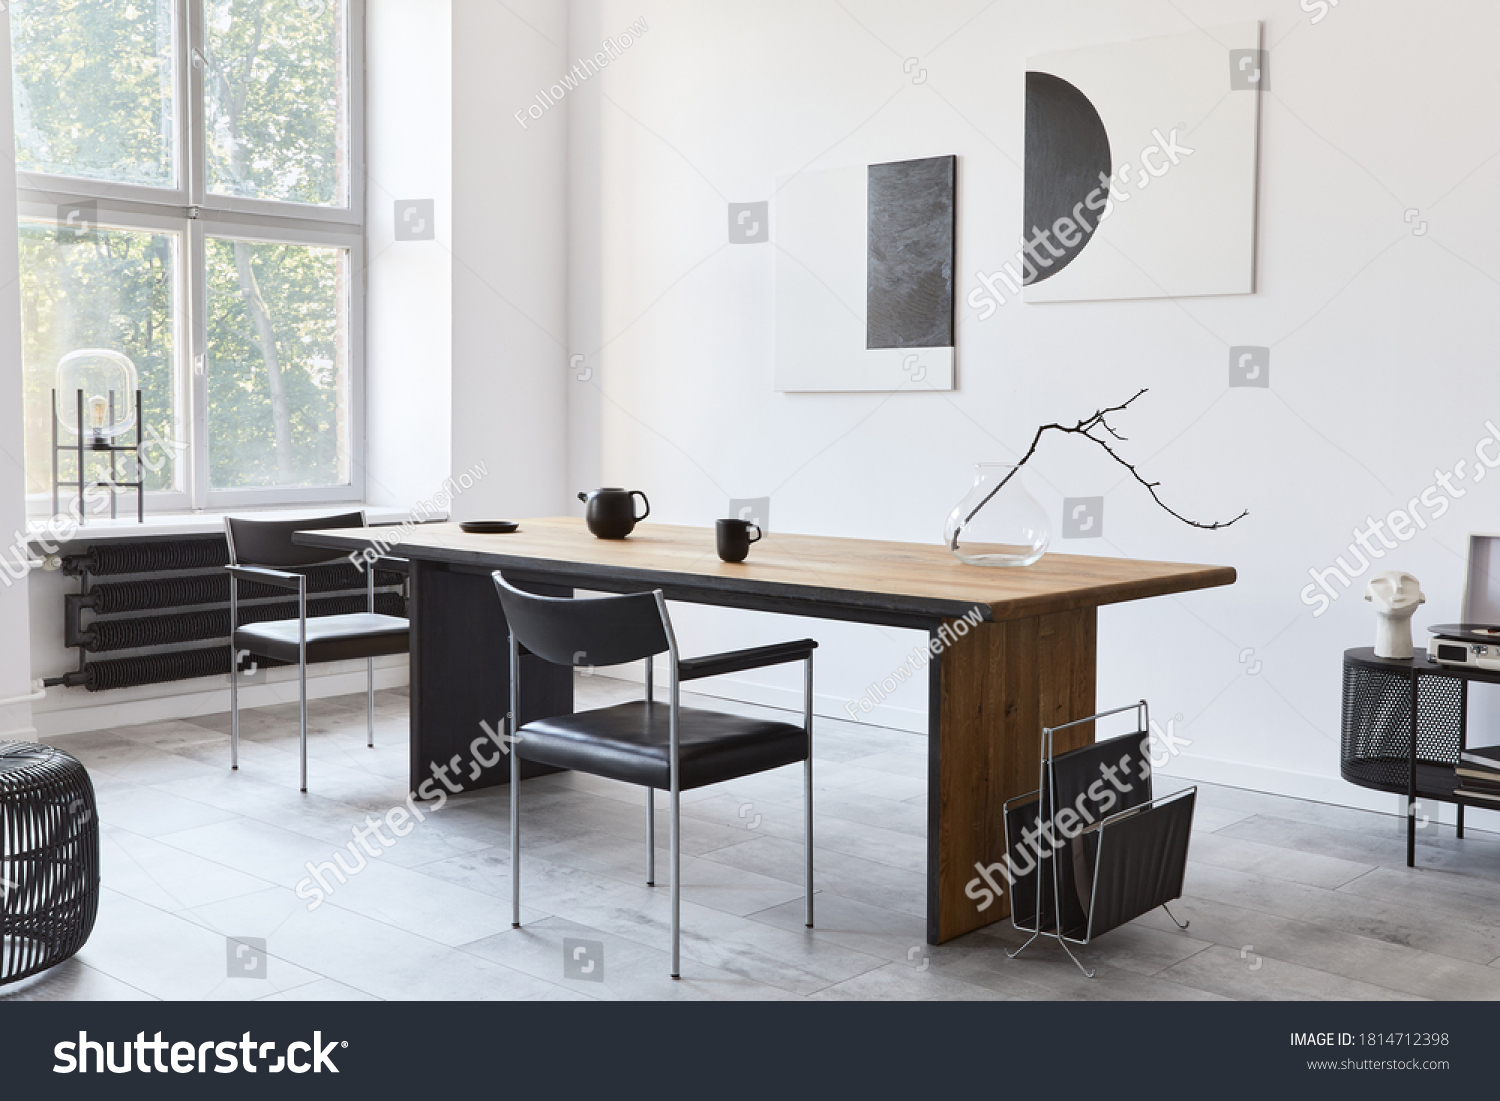 Stylish dining room interior with design wooden family table, black chairs, teapot with mug, mock up art paintings on the wall and elegant accessories in modern home decor. Template. #1814712398